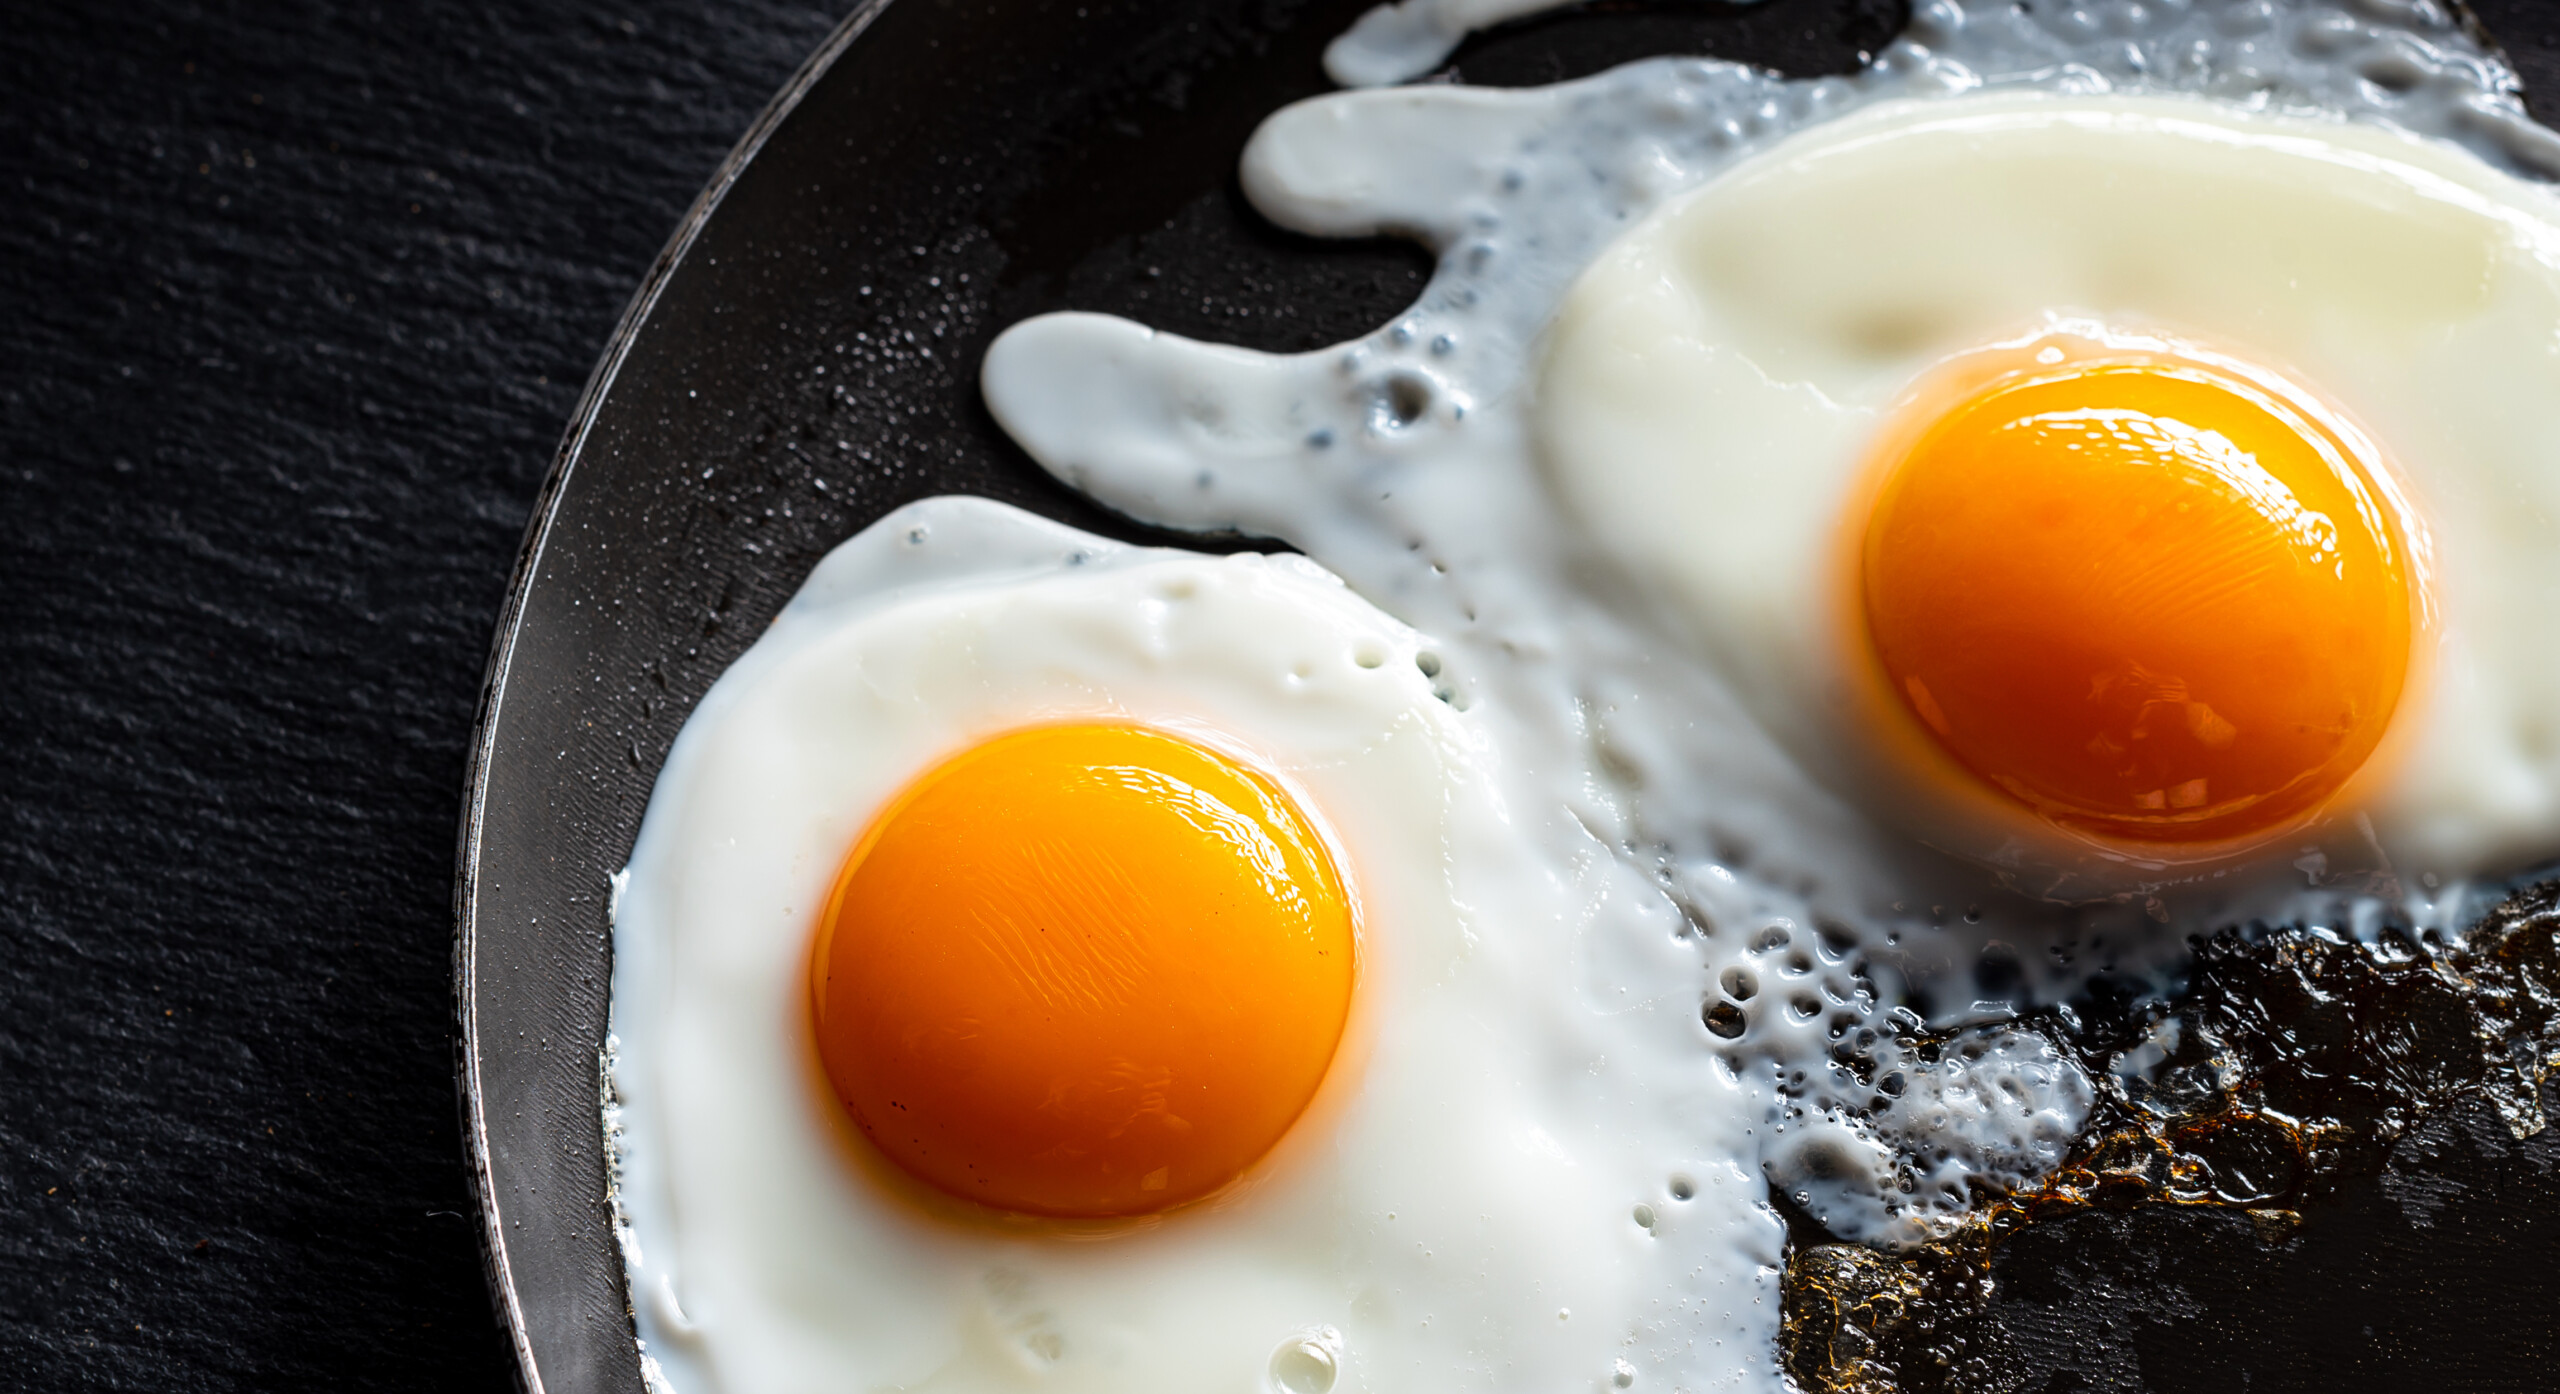 egg information and egg safety and how to cook eggs